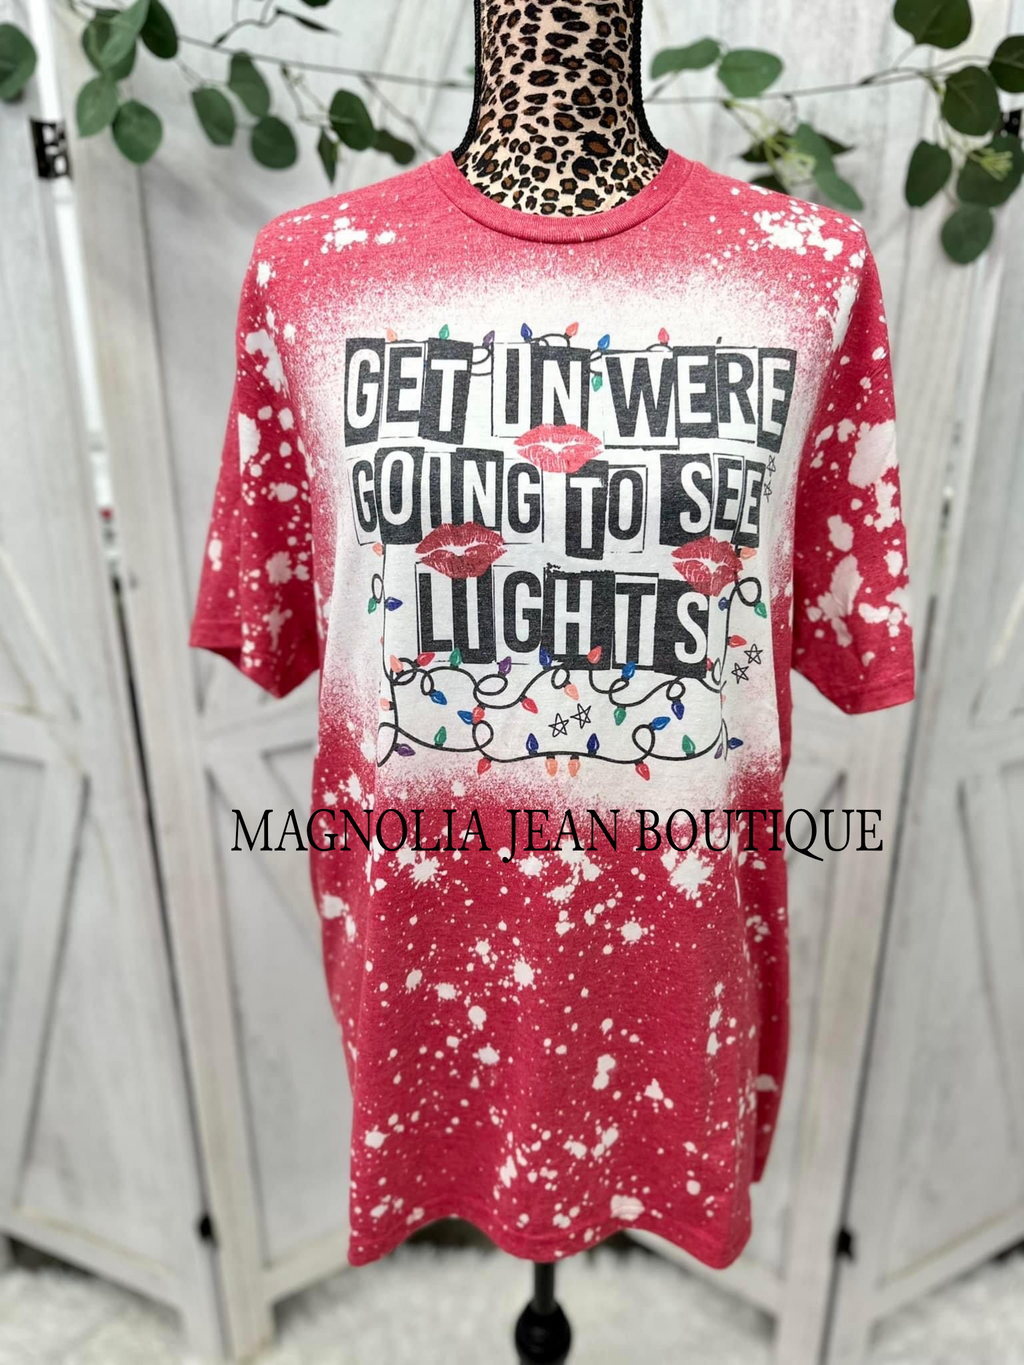 🎄Special Order Tee🎄 Get In We’re Going To See Christmas Lights Bleached Tee